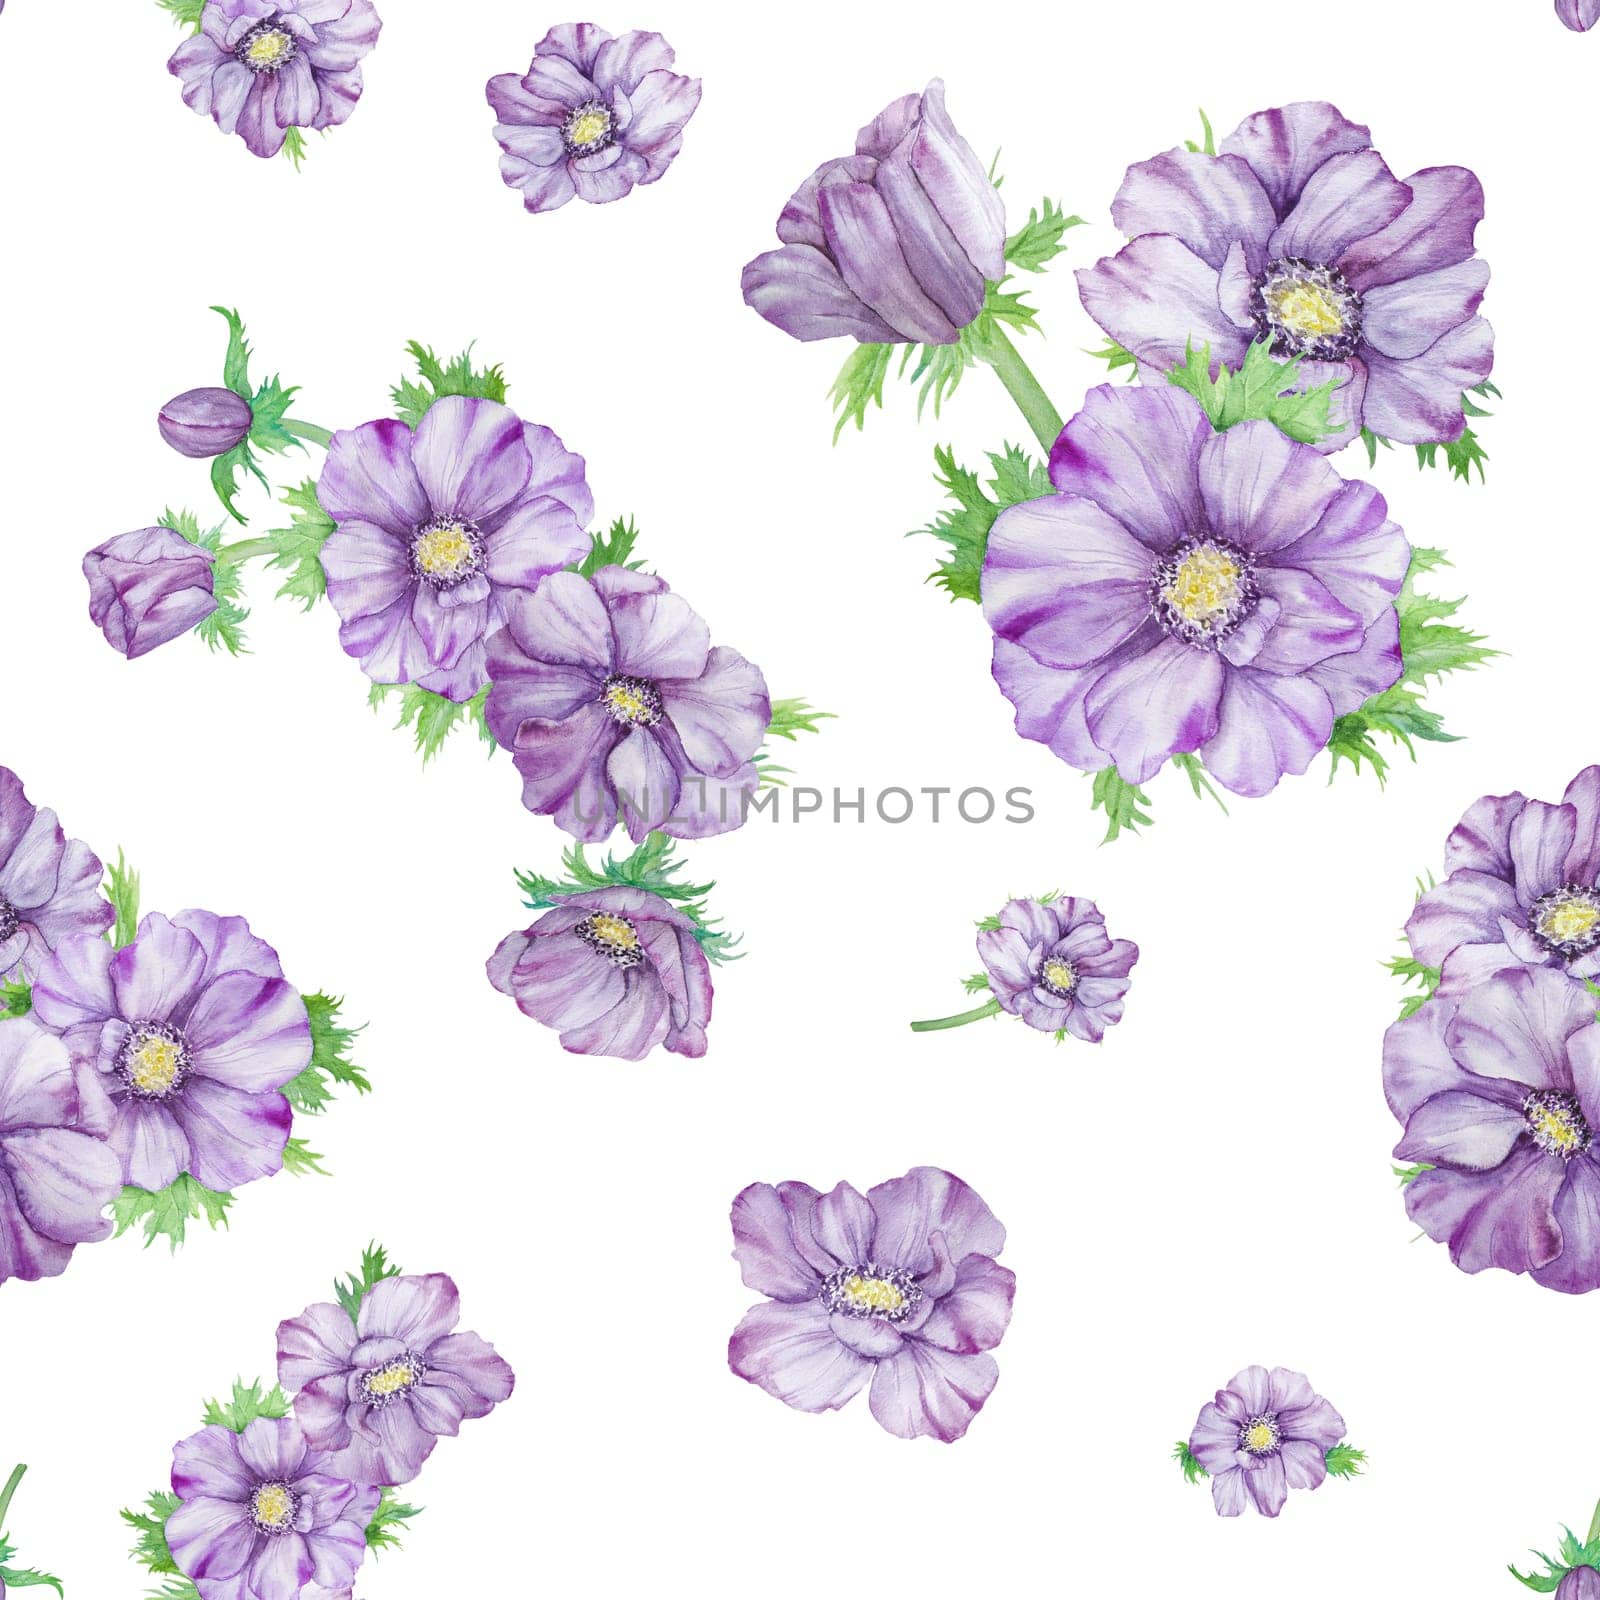 Watercolor hand drawn seamless pattern of purple anemones with green leaves isolated on white background. by florainlove_art